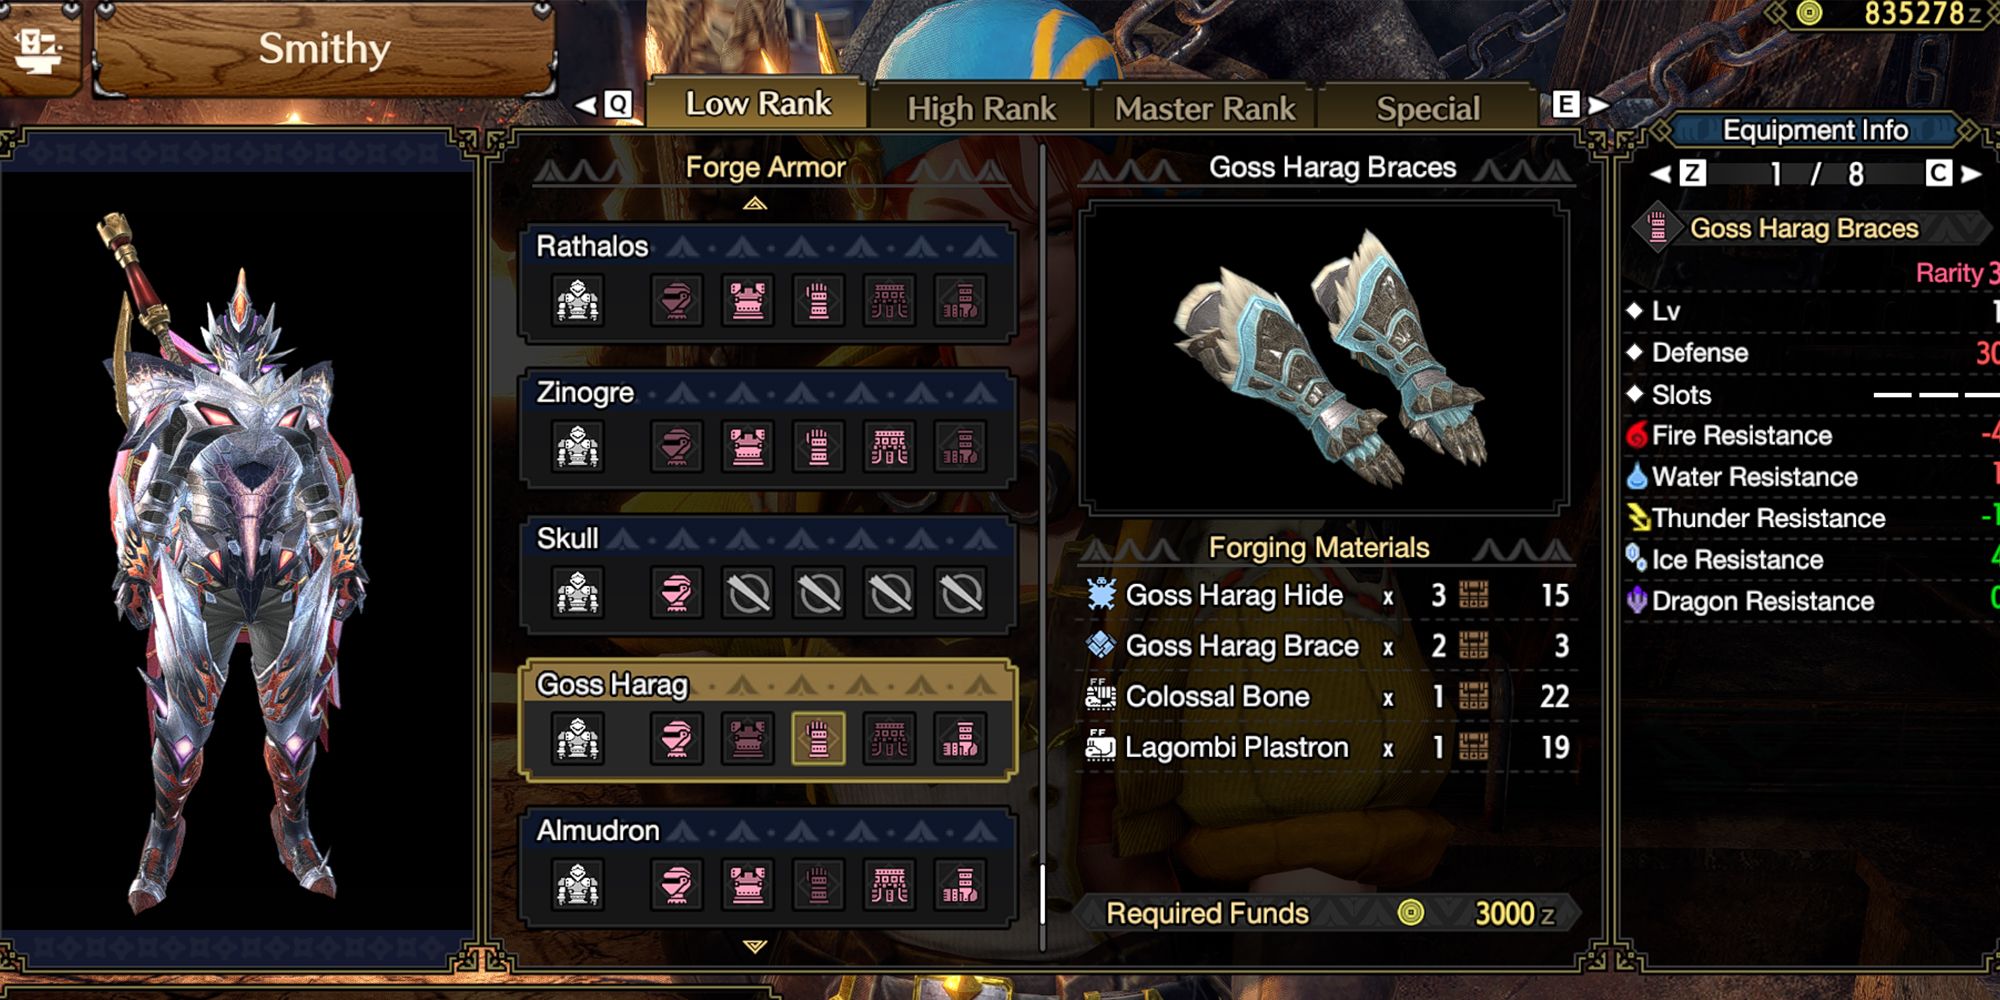 Monster Hunter Rise - Looking At Goss Harag Gauntlets At The Smithy